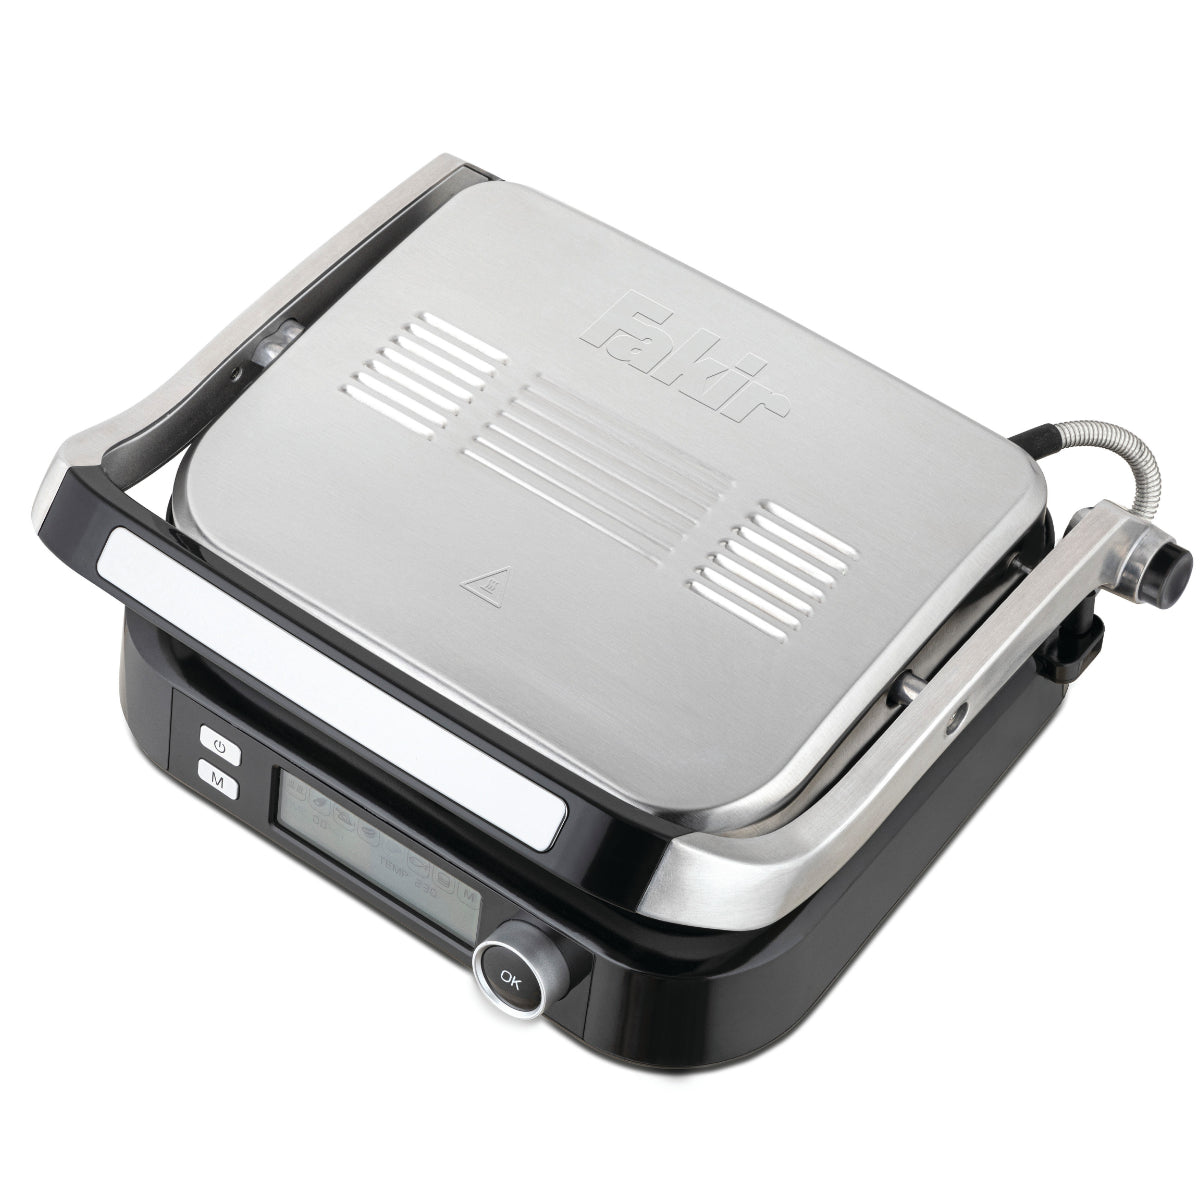 Fakir Grill Expert Smart Grill And Toaster,2100W